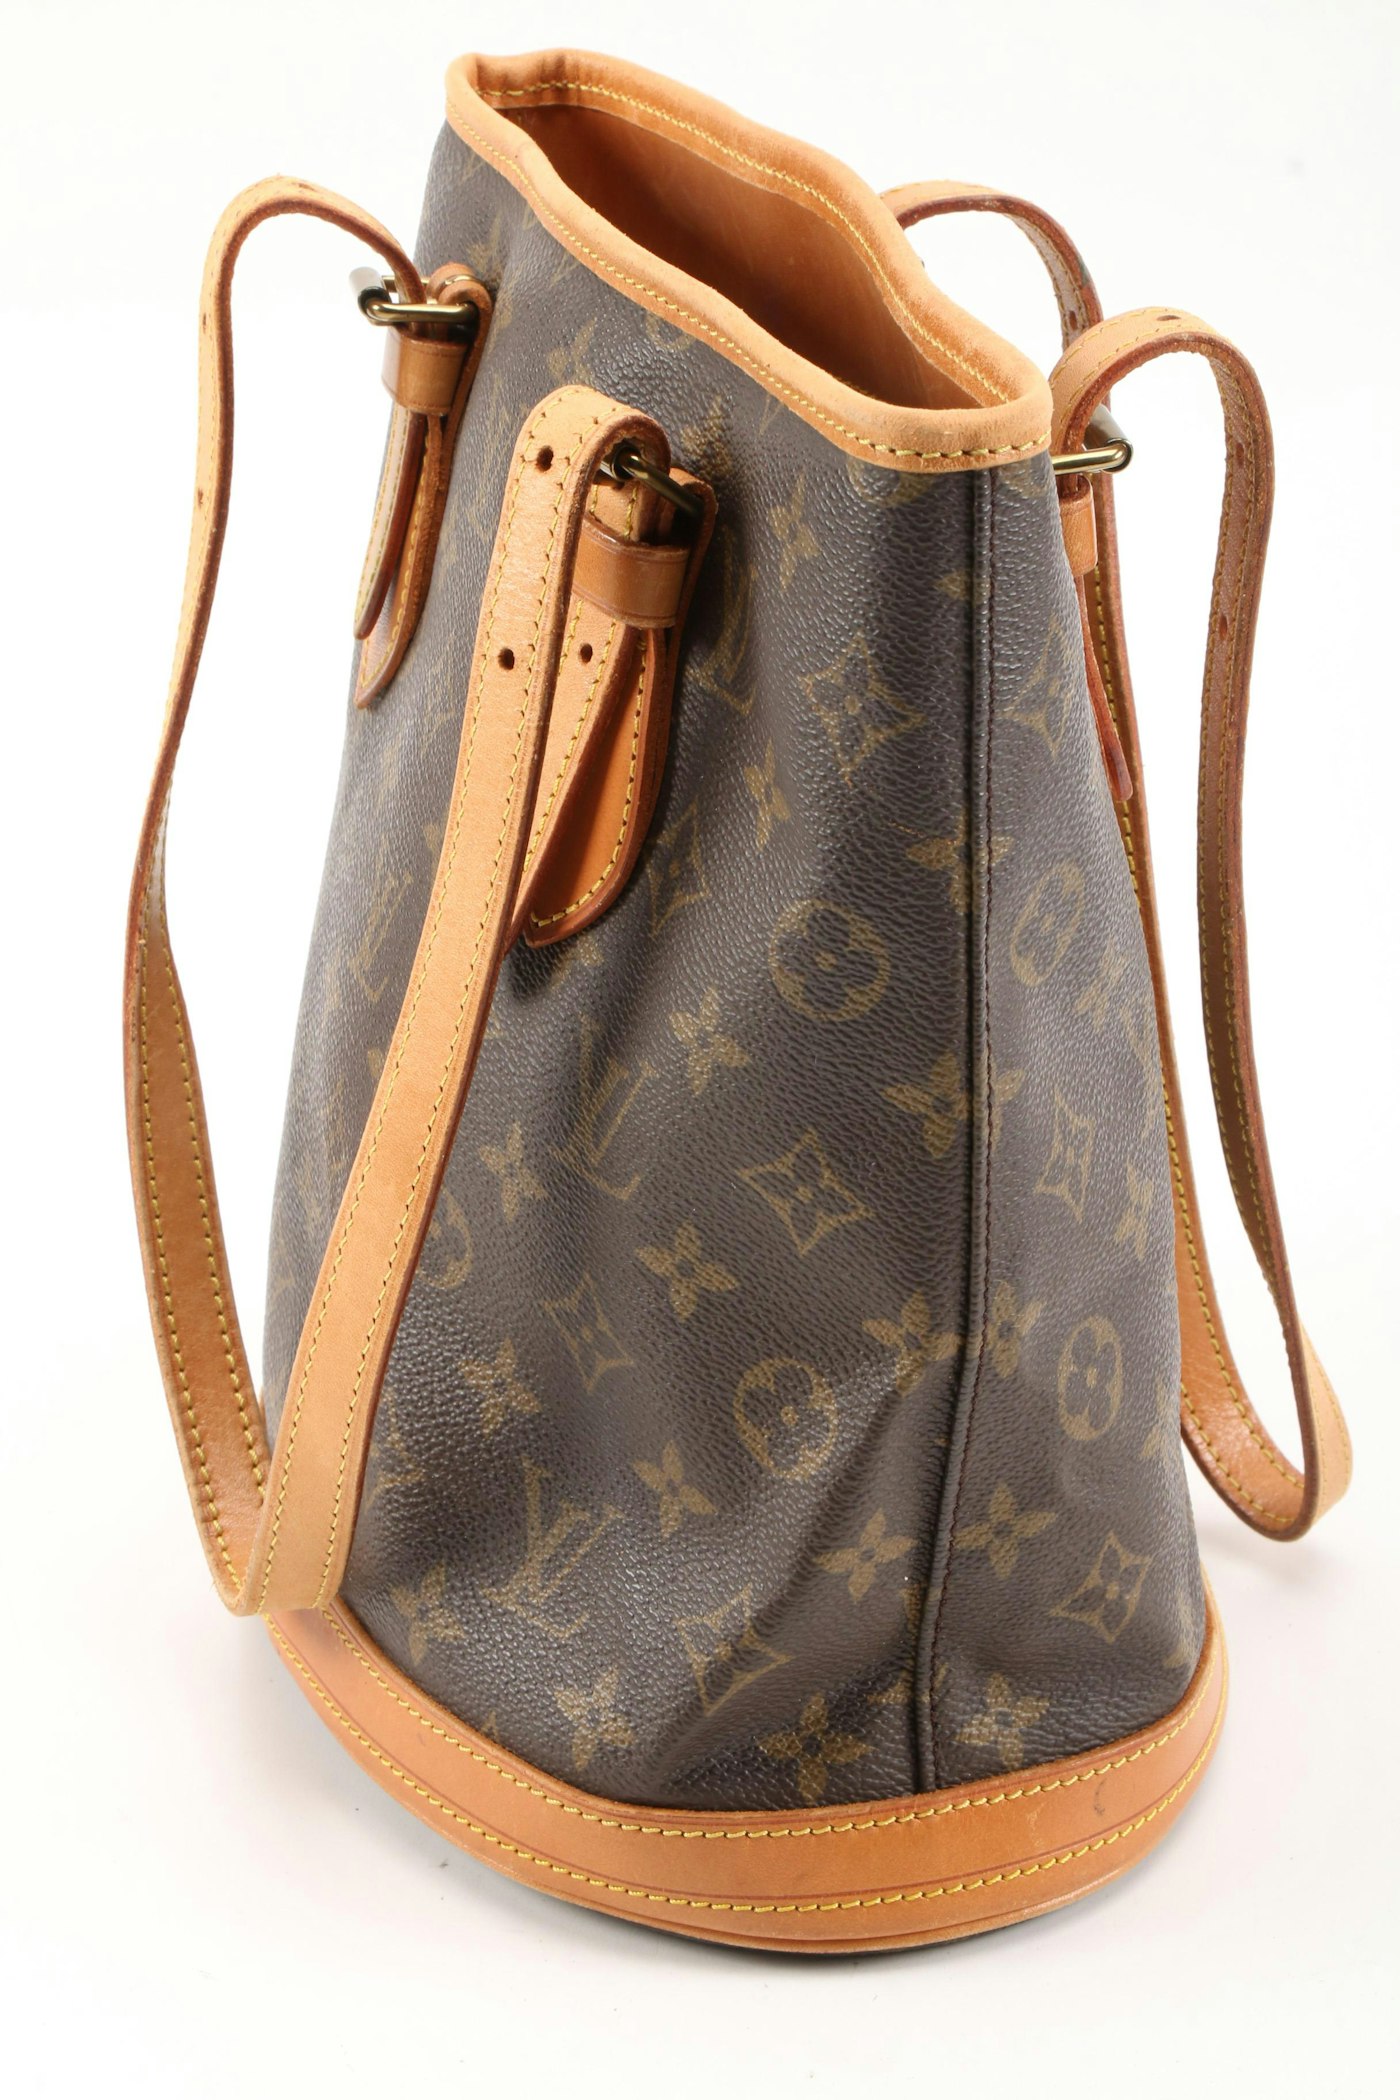 Updated Post: New Bag Additions to Louis Vuitton's Monogram Canvas Range  with Prices! - BagAddicts Anonymous